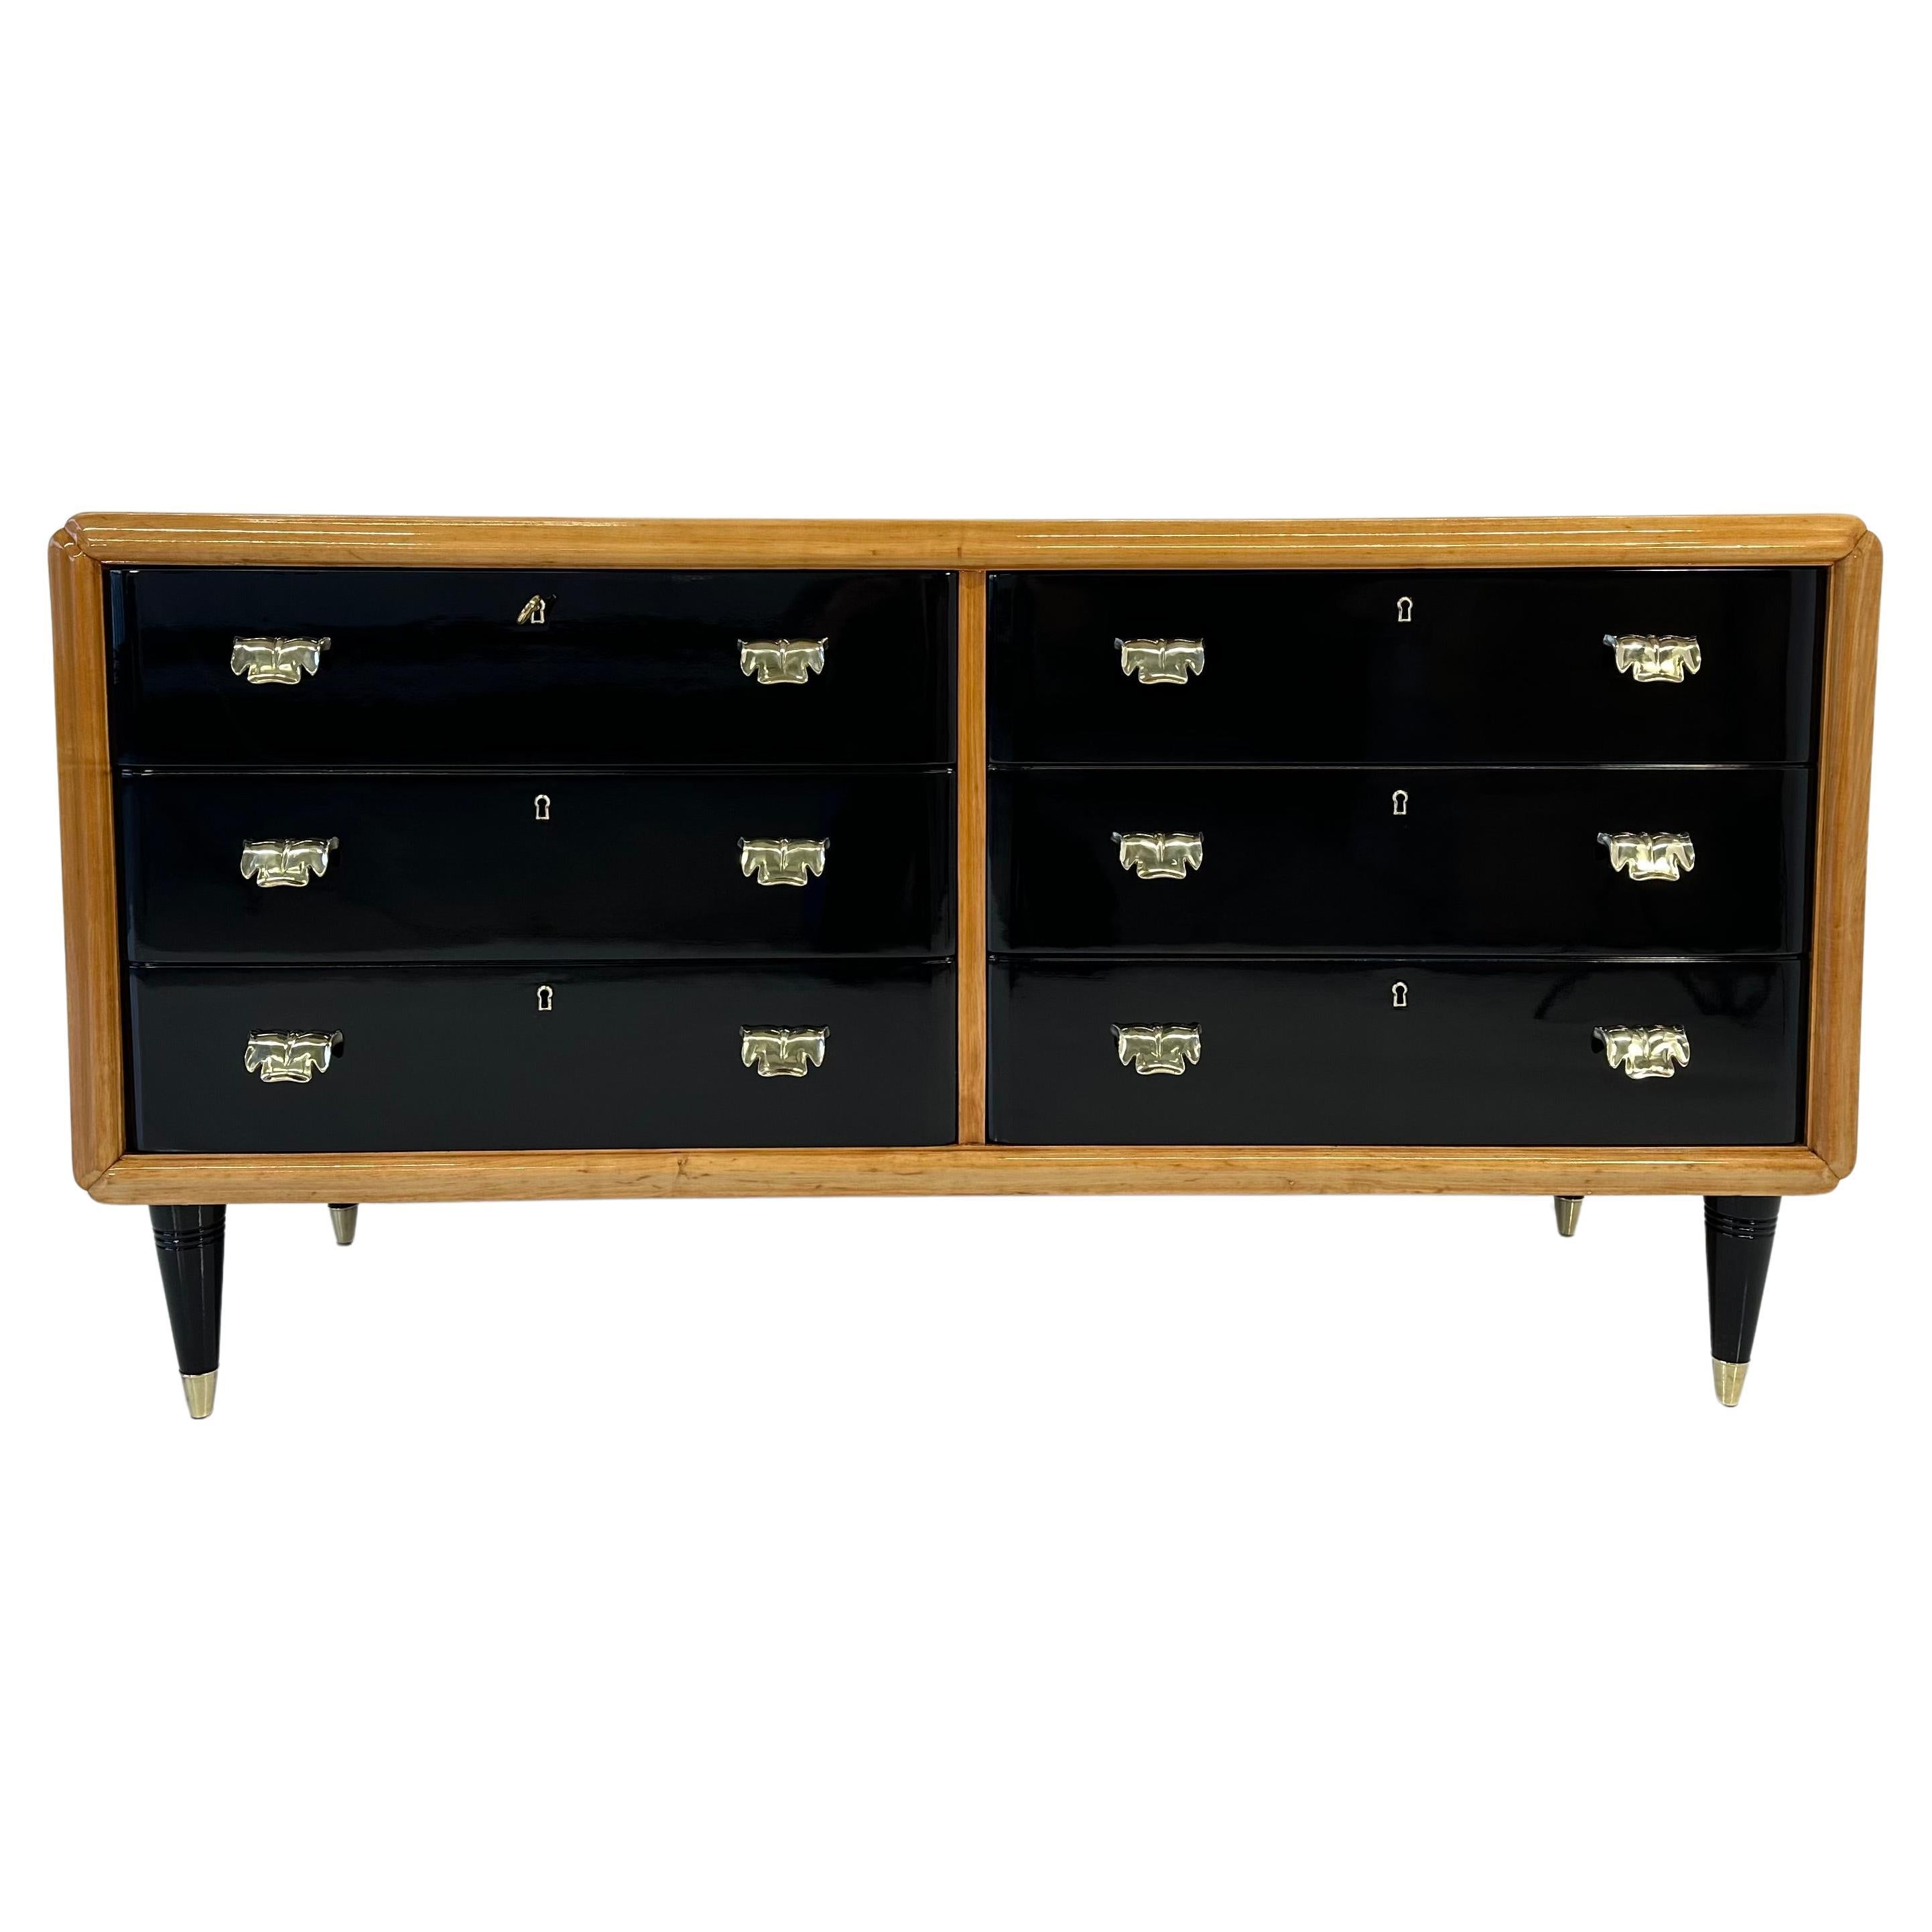 Italian Art Deco Maple, Brass and Black Lacquered Dresser, 1940s For Sale